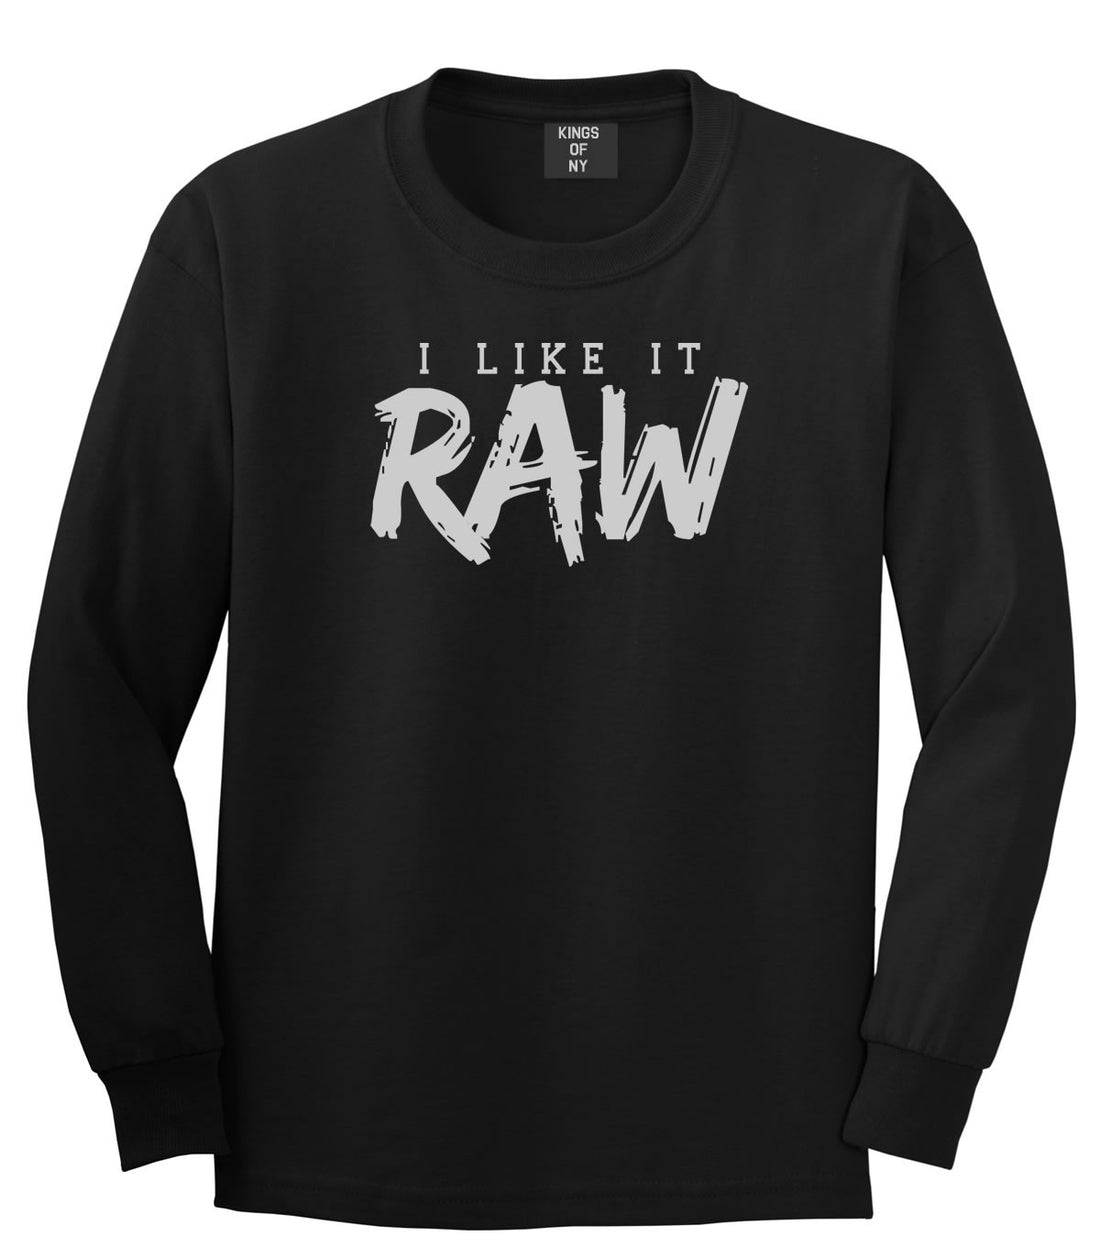 I Like It Raw Long Sleeve T-Shirt in Black By Kings Of NY